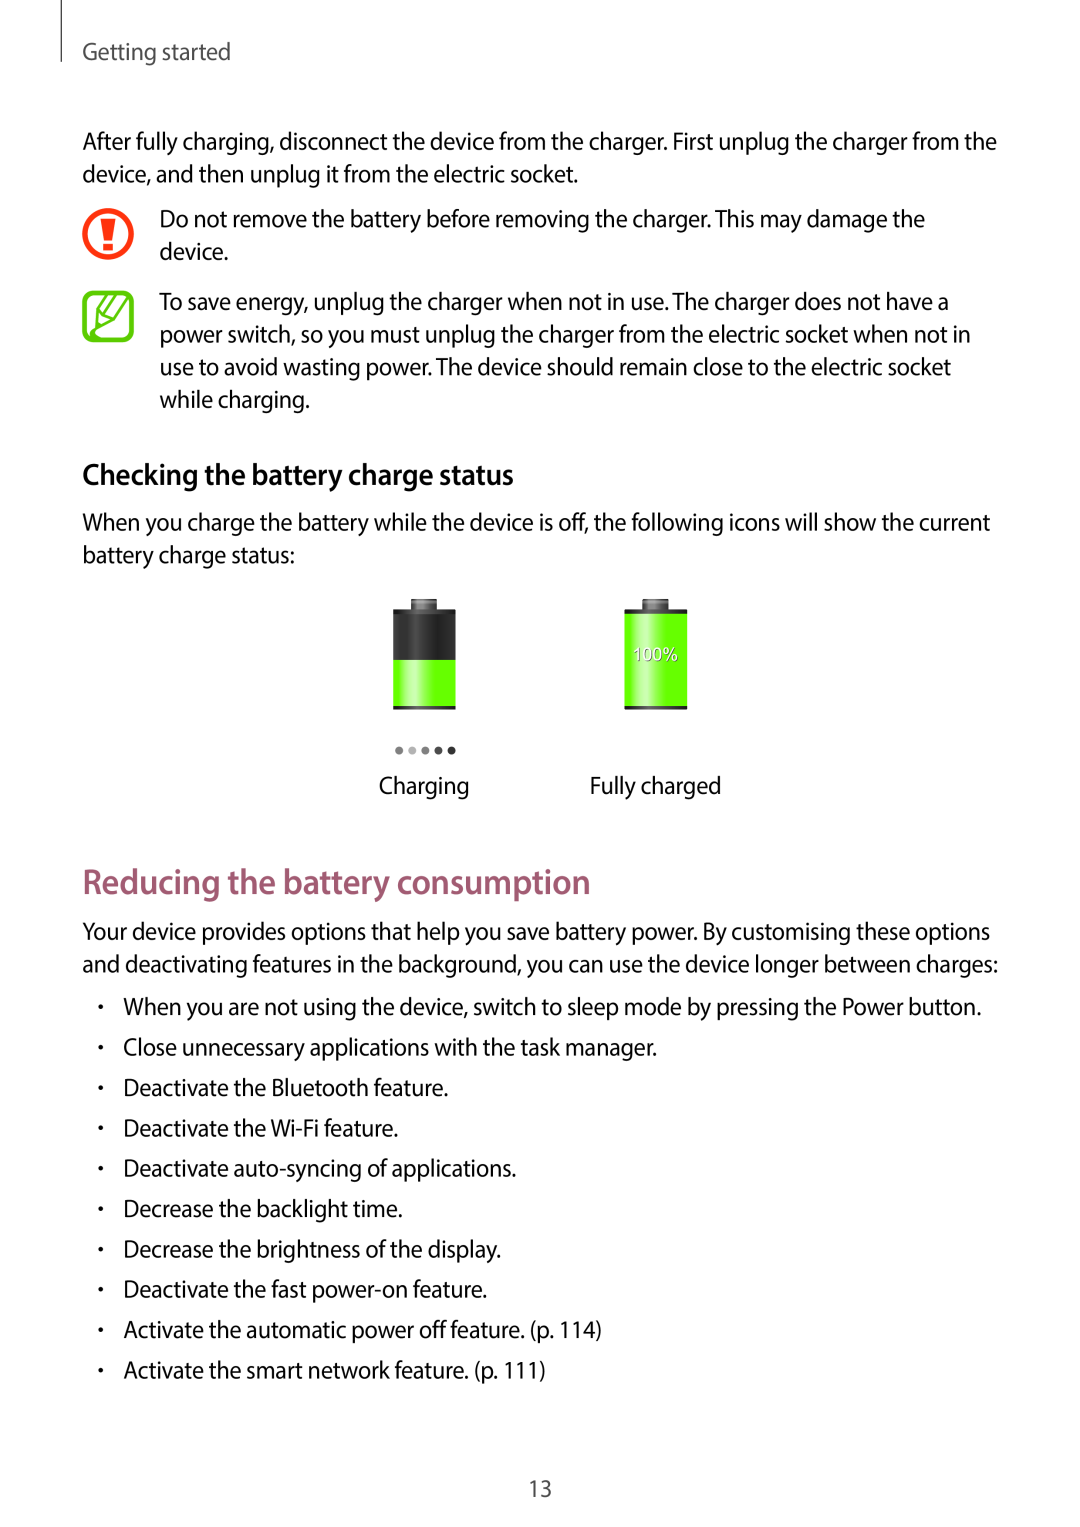 Samsung EK-GC100 user manual Reducing the battery consumption, Checking the battery charge status, Getting started 